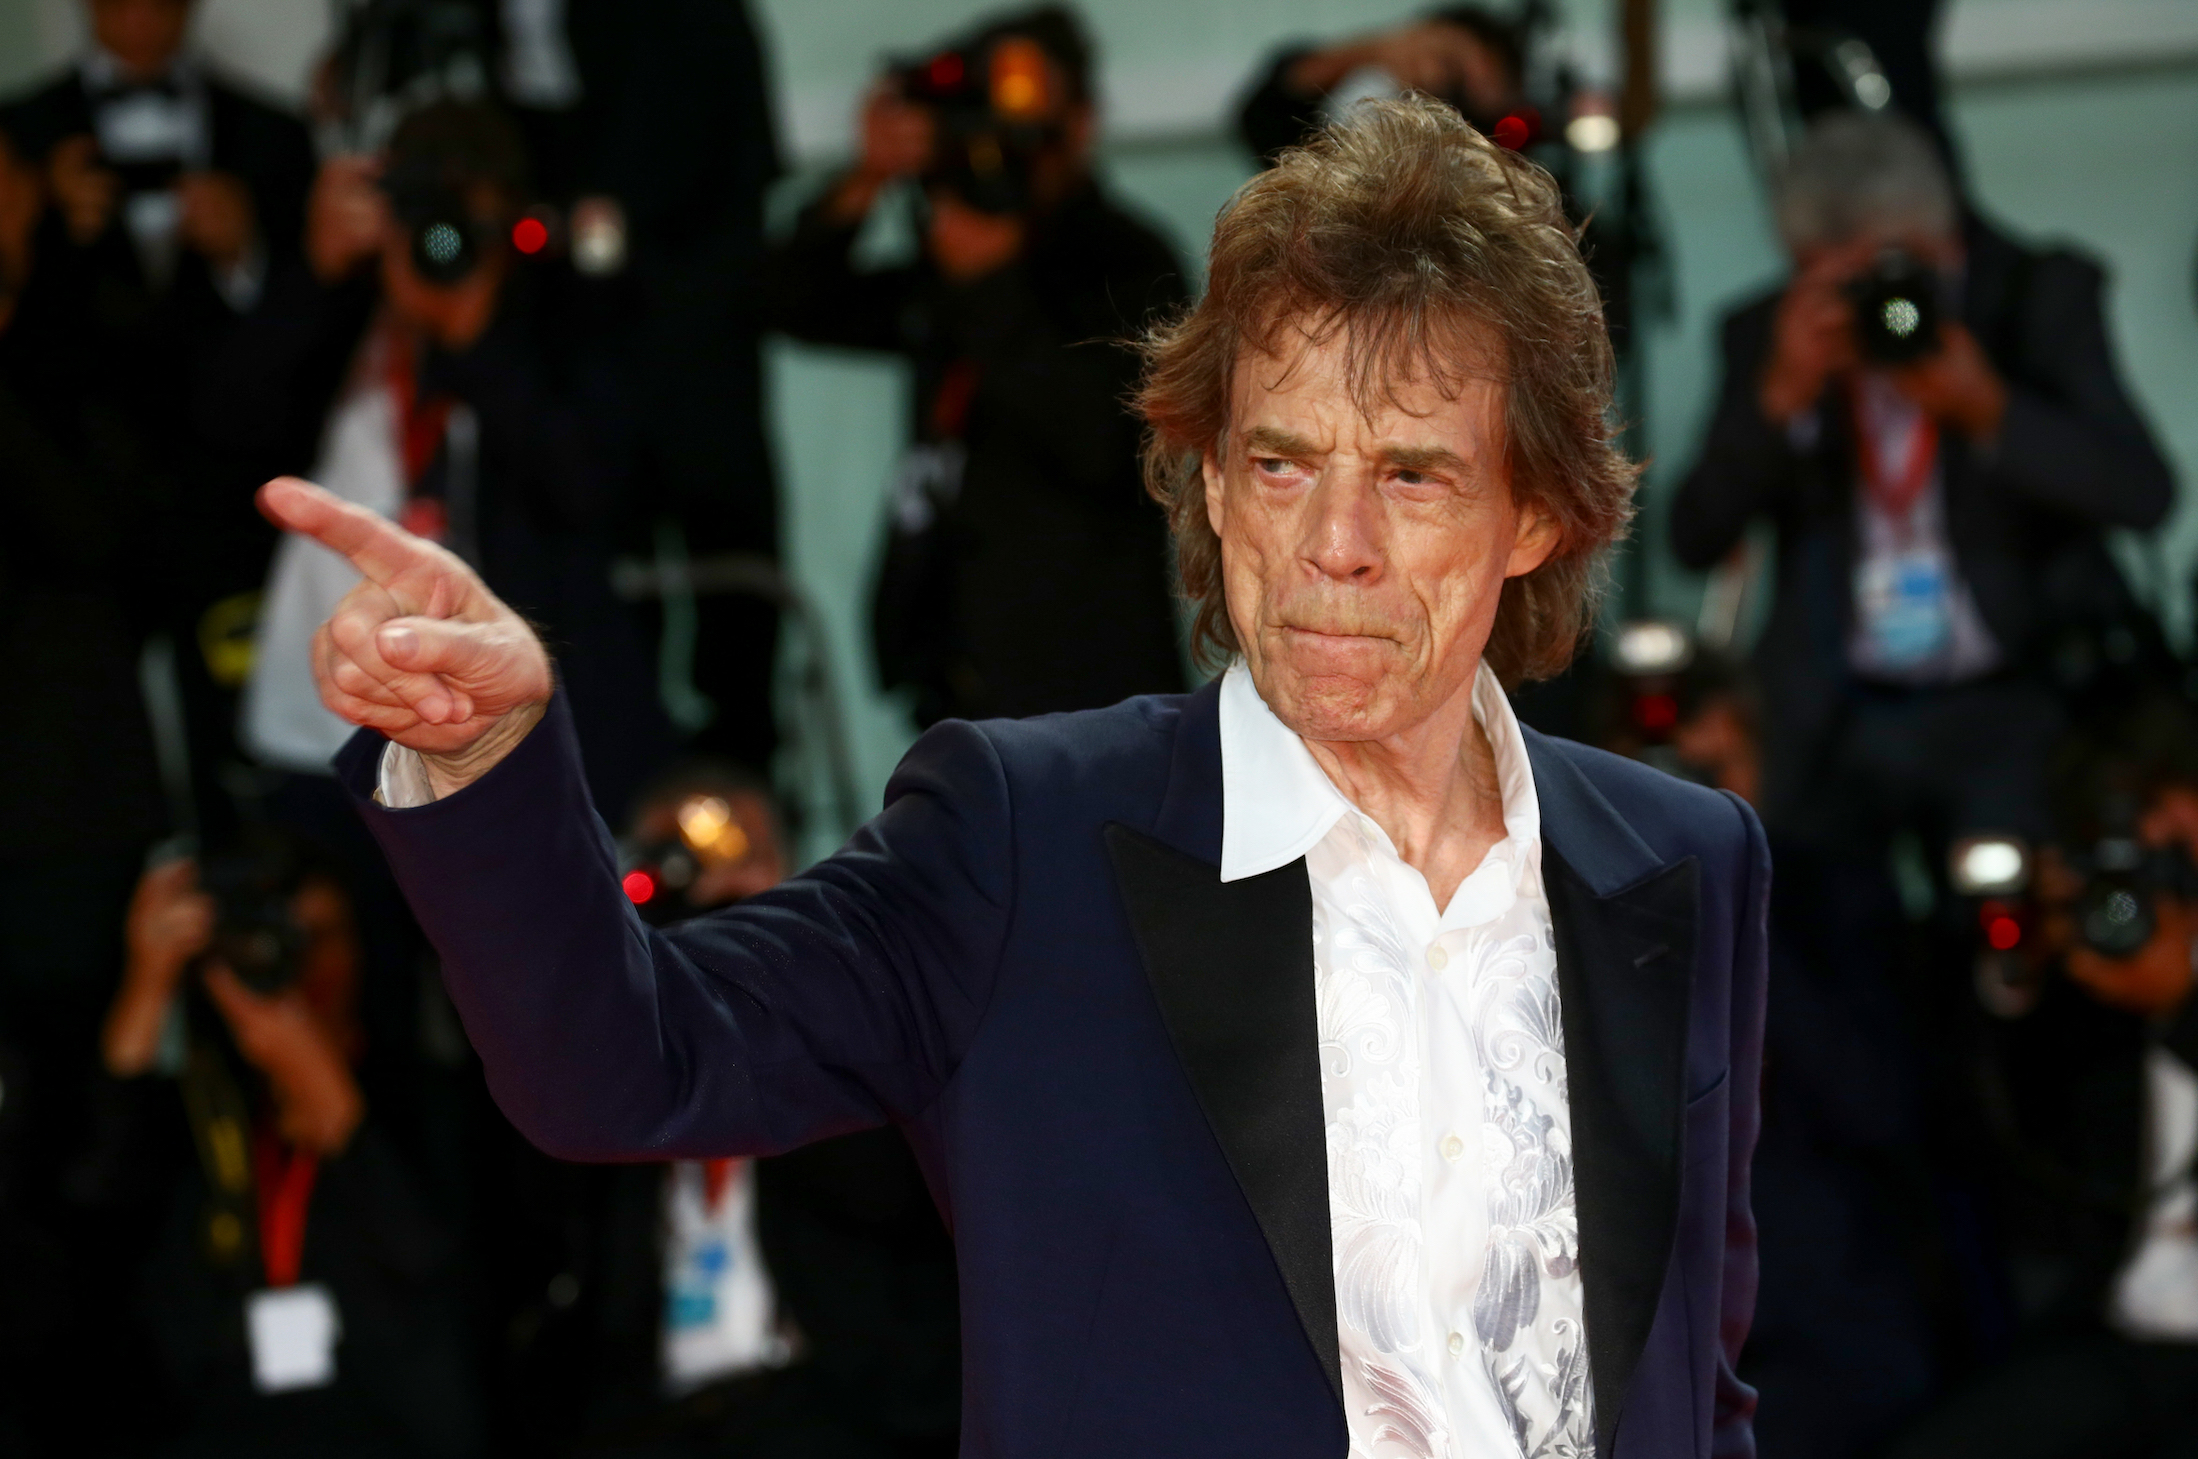 Mick Jagger of The Rolling Stones attends the 76th Venice Film Festival in 2019